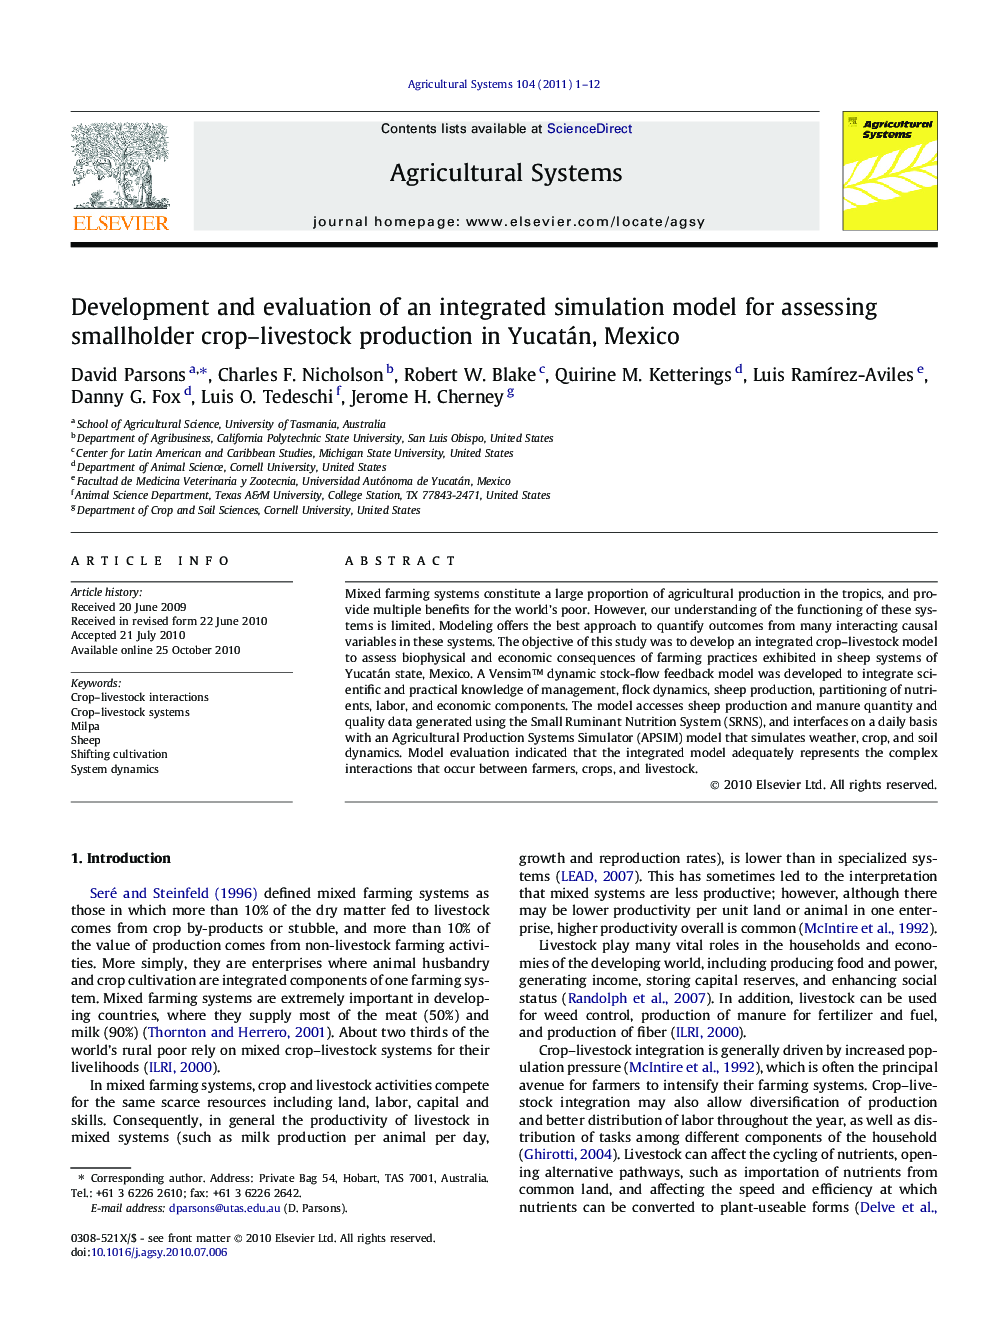 Development and evaluation of an integrated simulation model for assessing smallholder crop–livestock production in Yucatán, Mexico